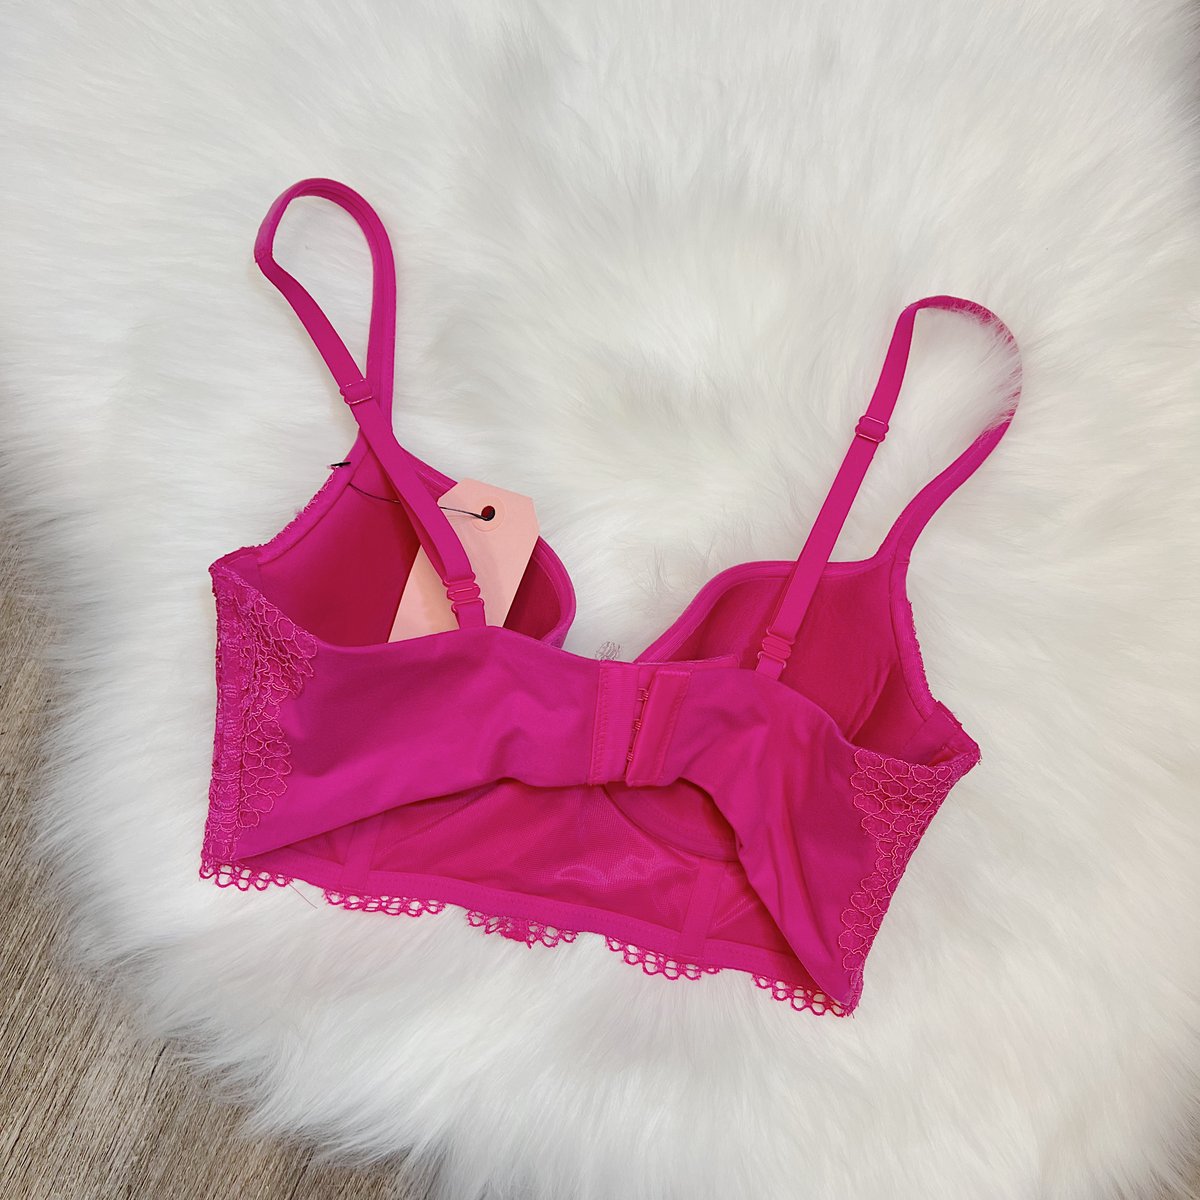 PINK Bra (Size 32B) - $10 (66% Off Retail) - From Trendy